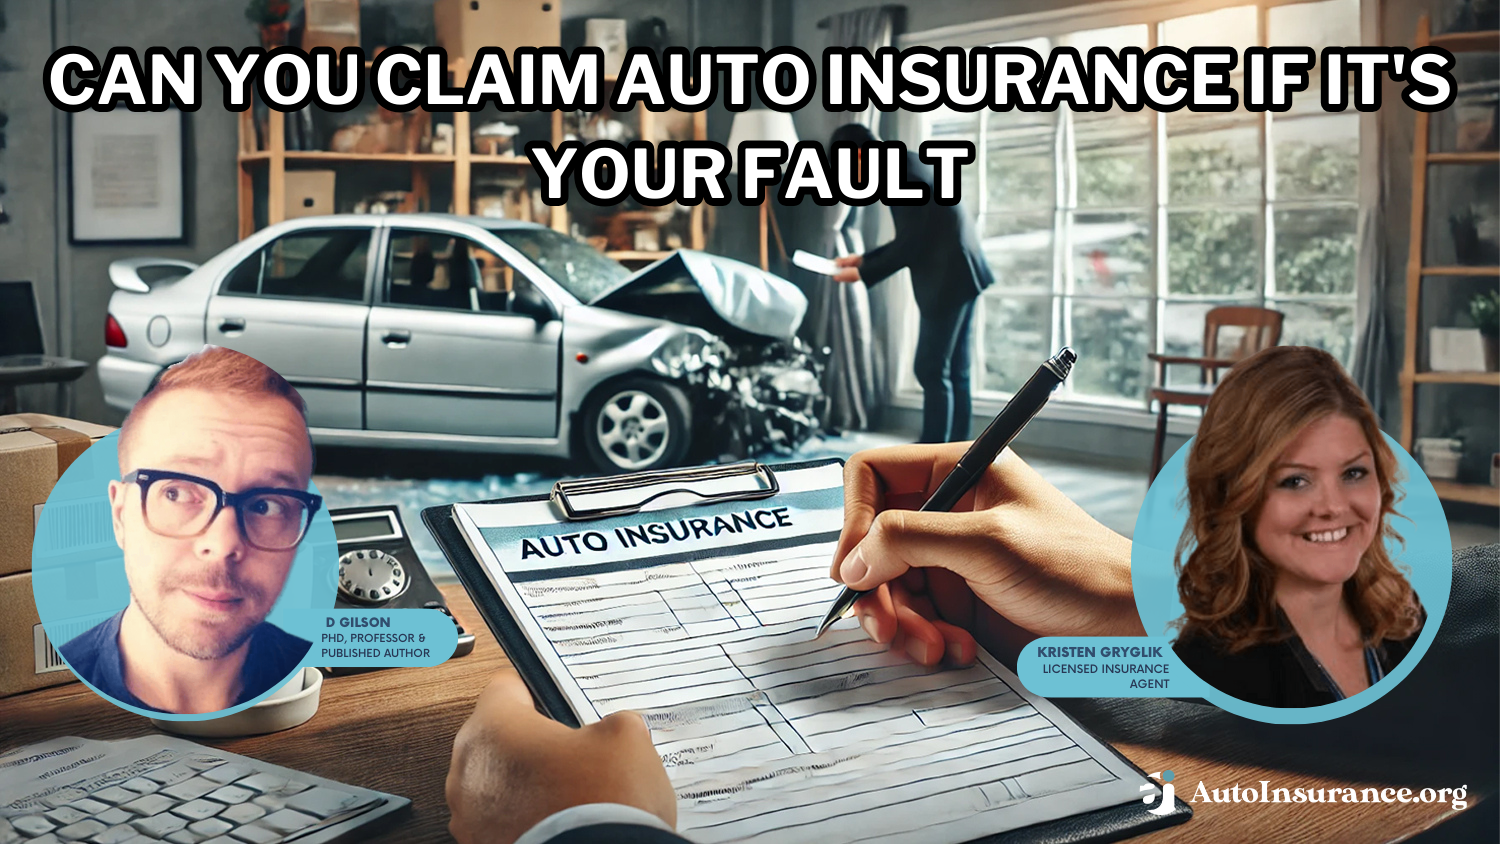 Can you claim auto insurance if it’s your fault?